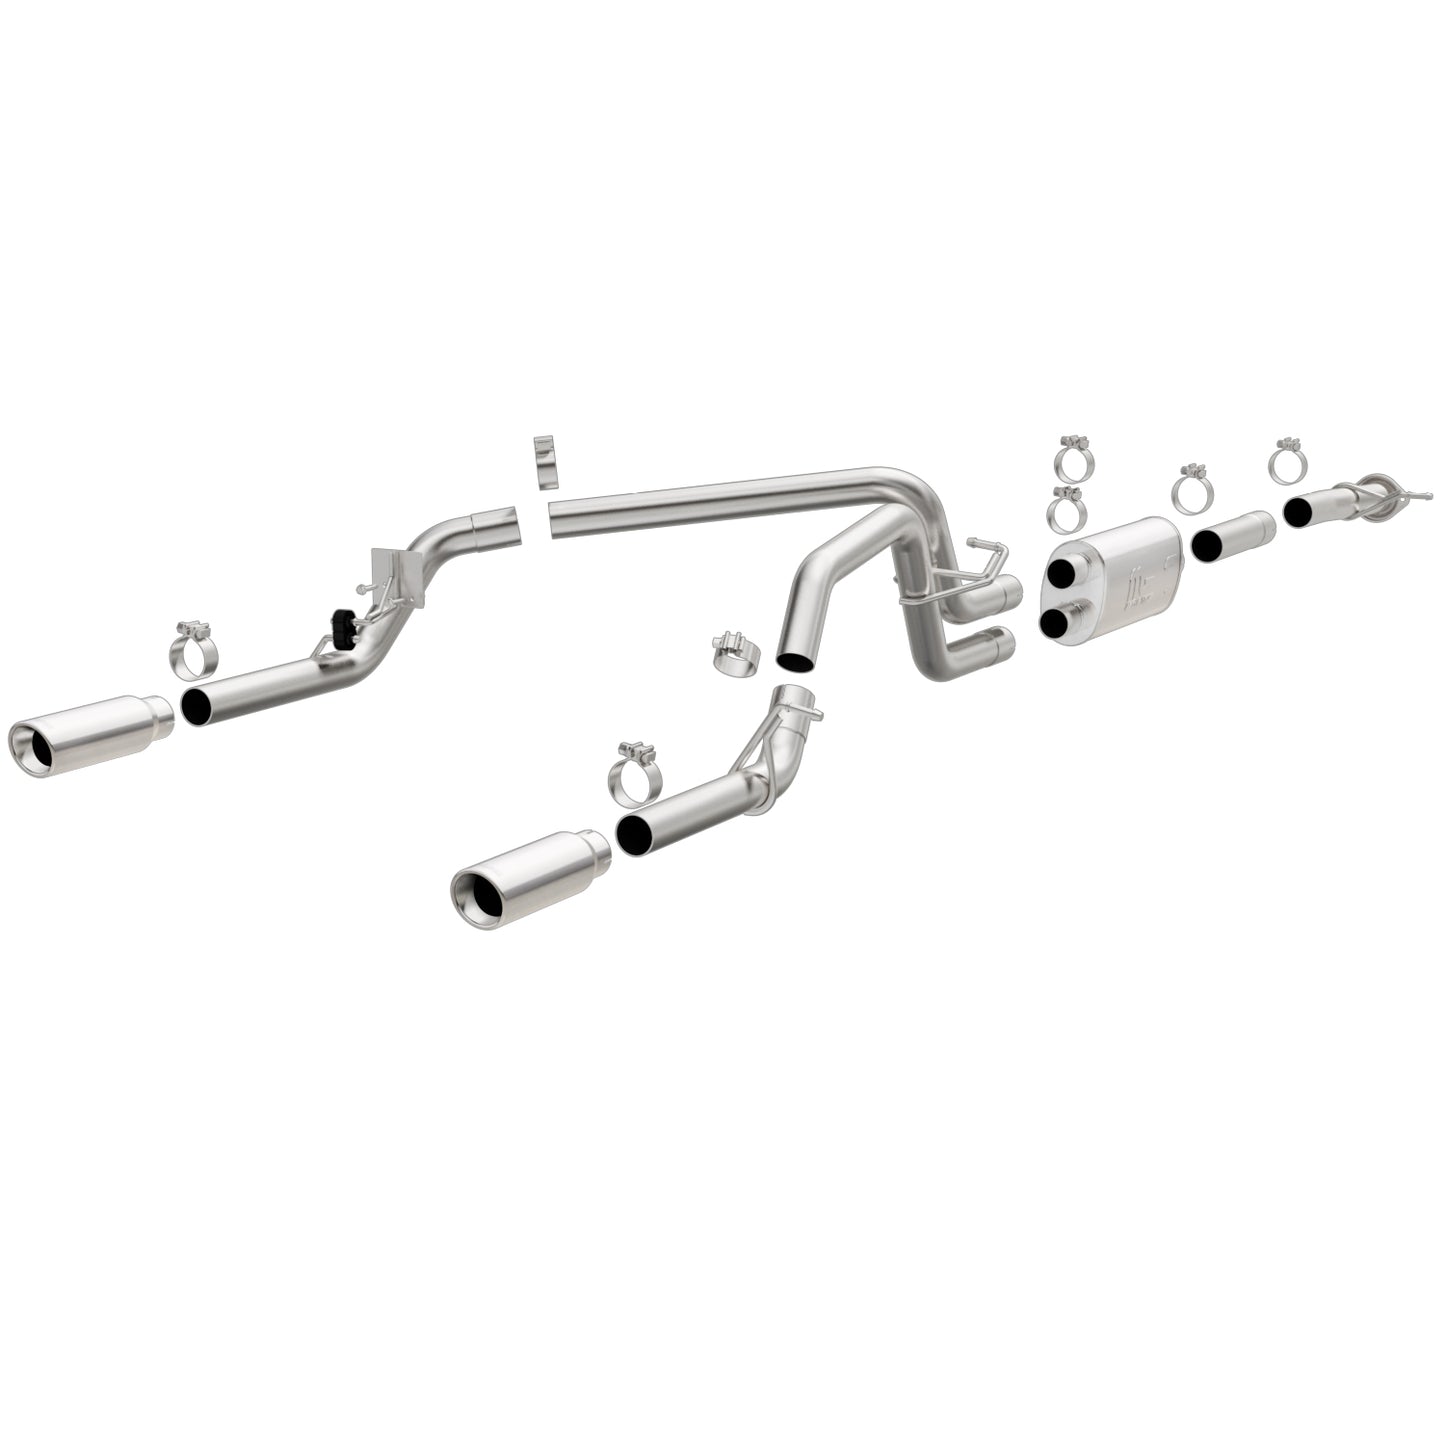 MagnaFlow Street Series Cat-Back Performance Exhaust System 19019